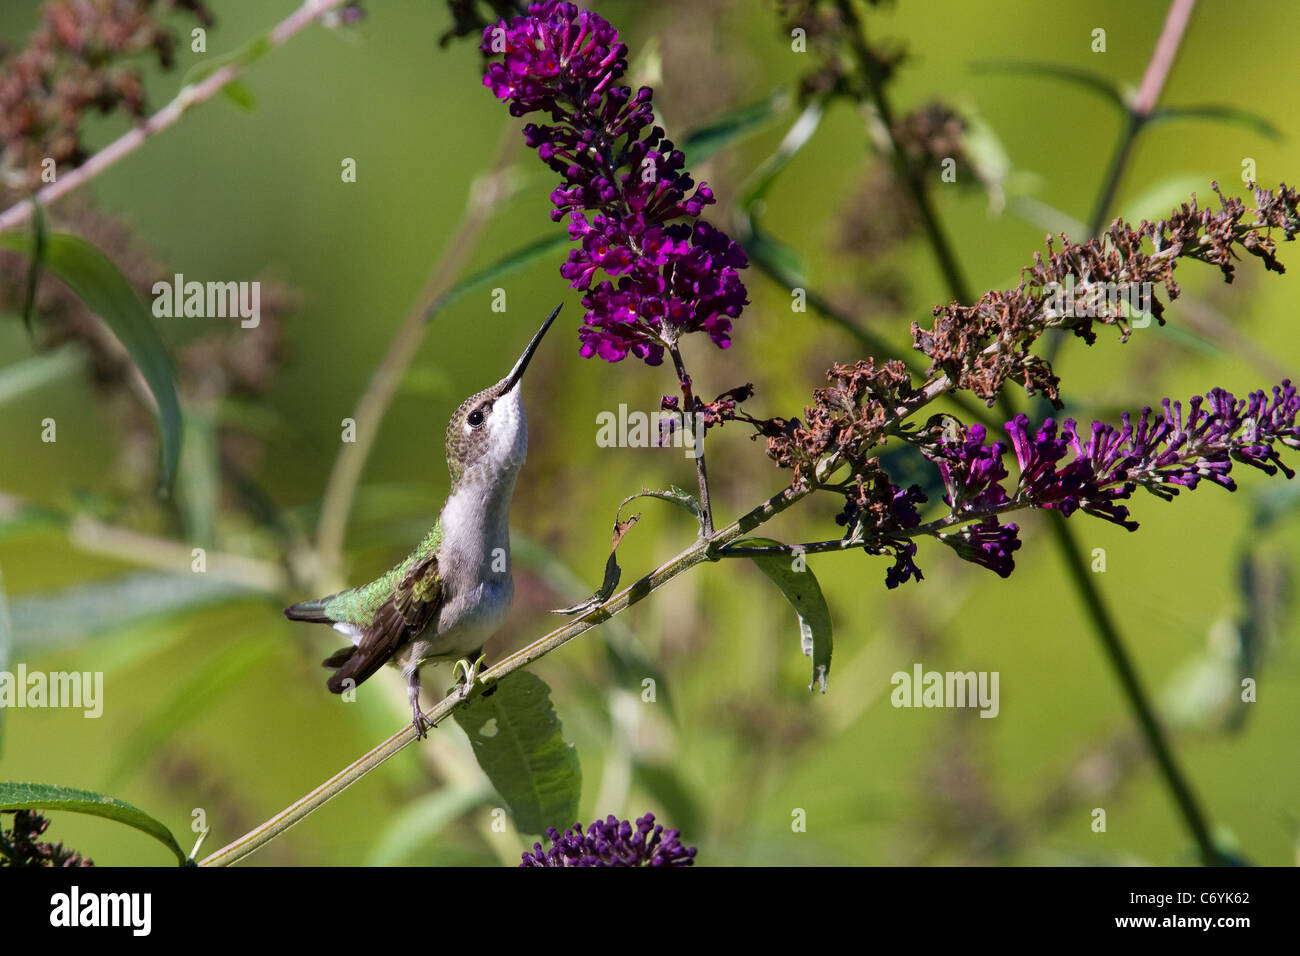 Hummingbird, Ruby-throated hummingbird female, Archilochus colubris, humming bird, perches on a branch and stretches to reach flowers. Stock Photo